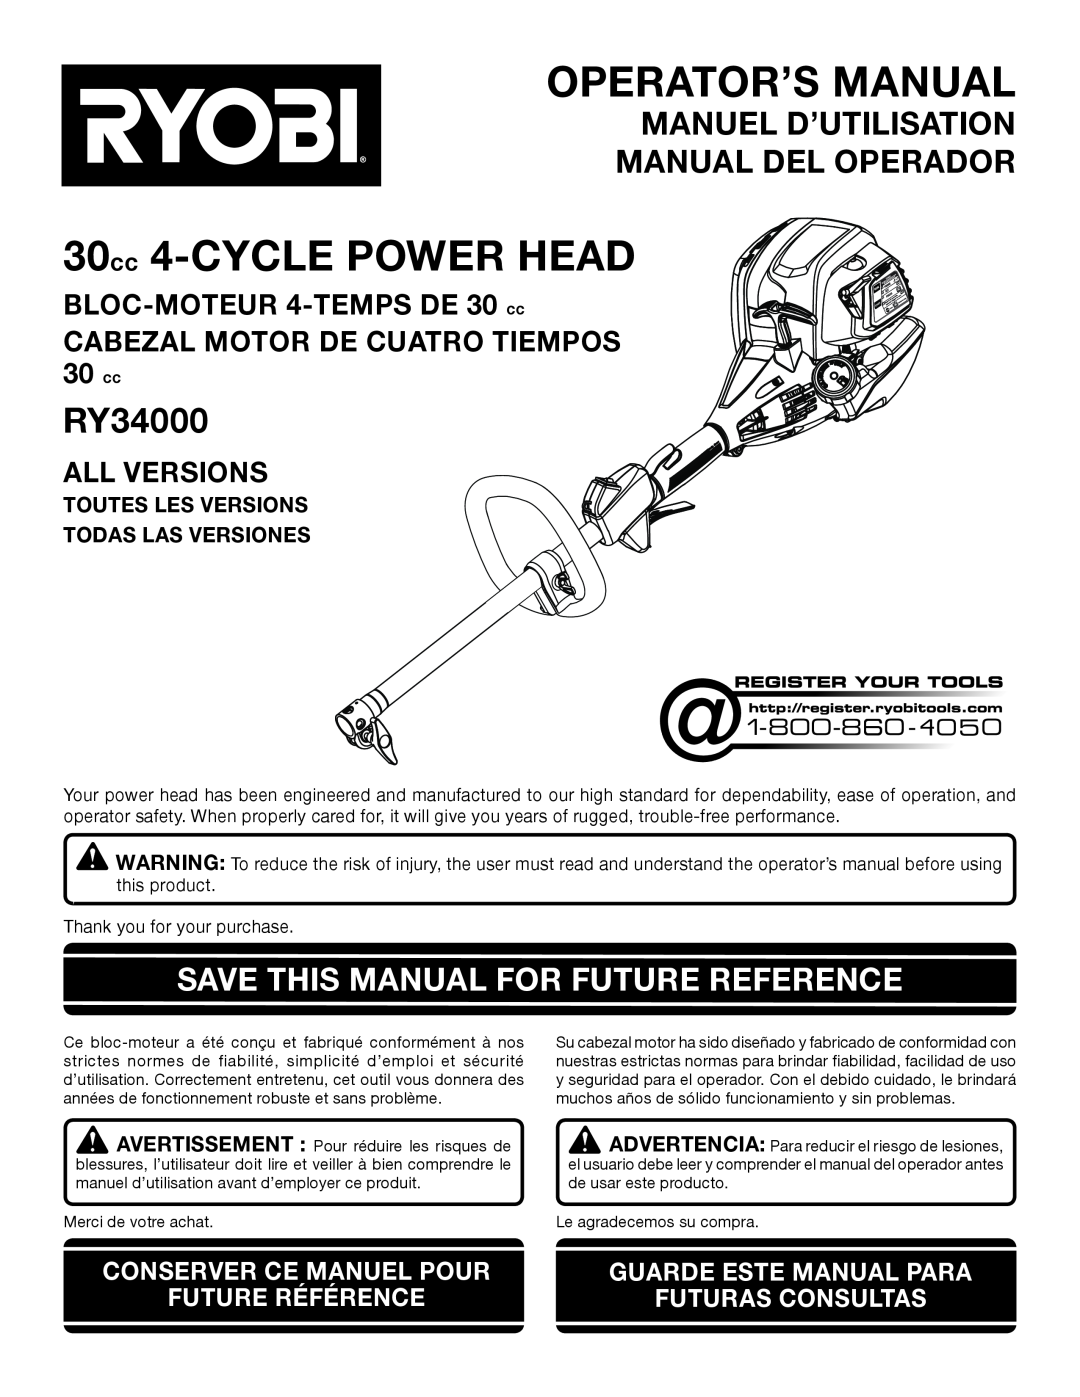 Ryobi RY34000 manuel dutilisation Save This Manual For Future Reference, BLOC-MOTEUR 4-TEMPSDE 30 cc, All Versions 